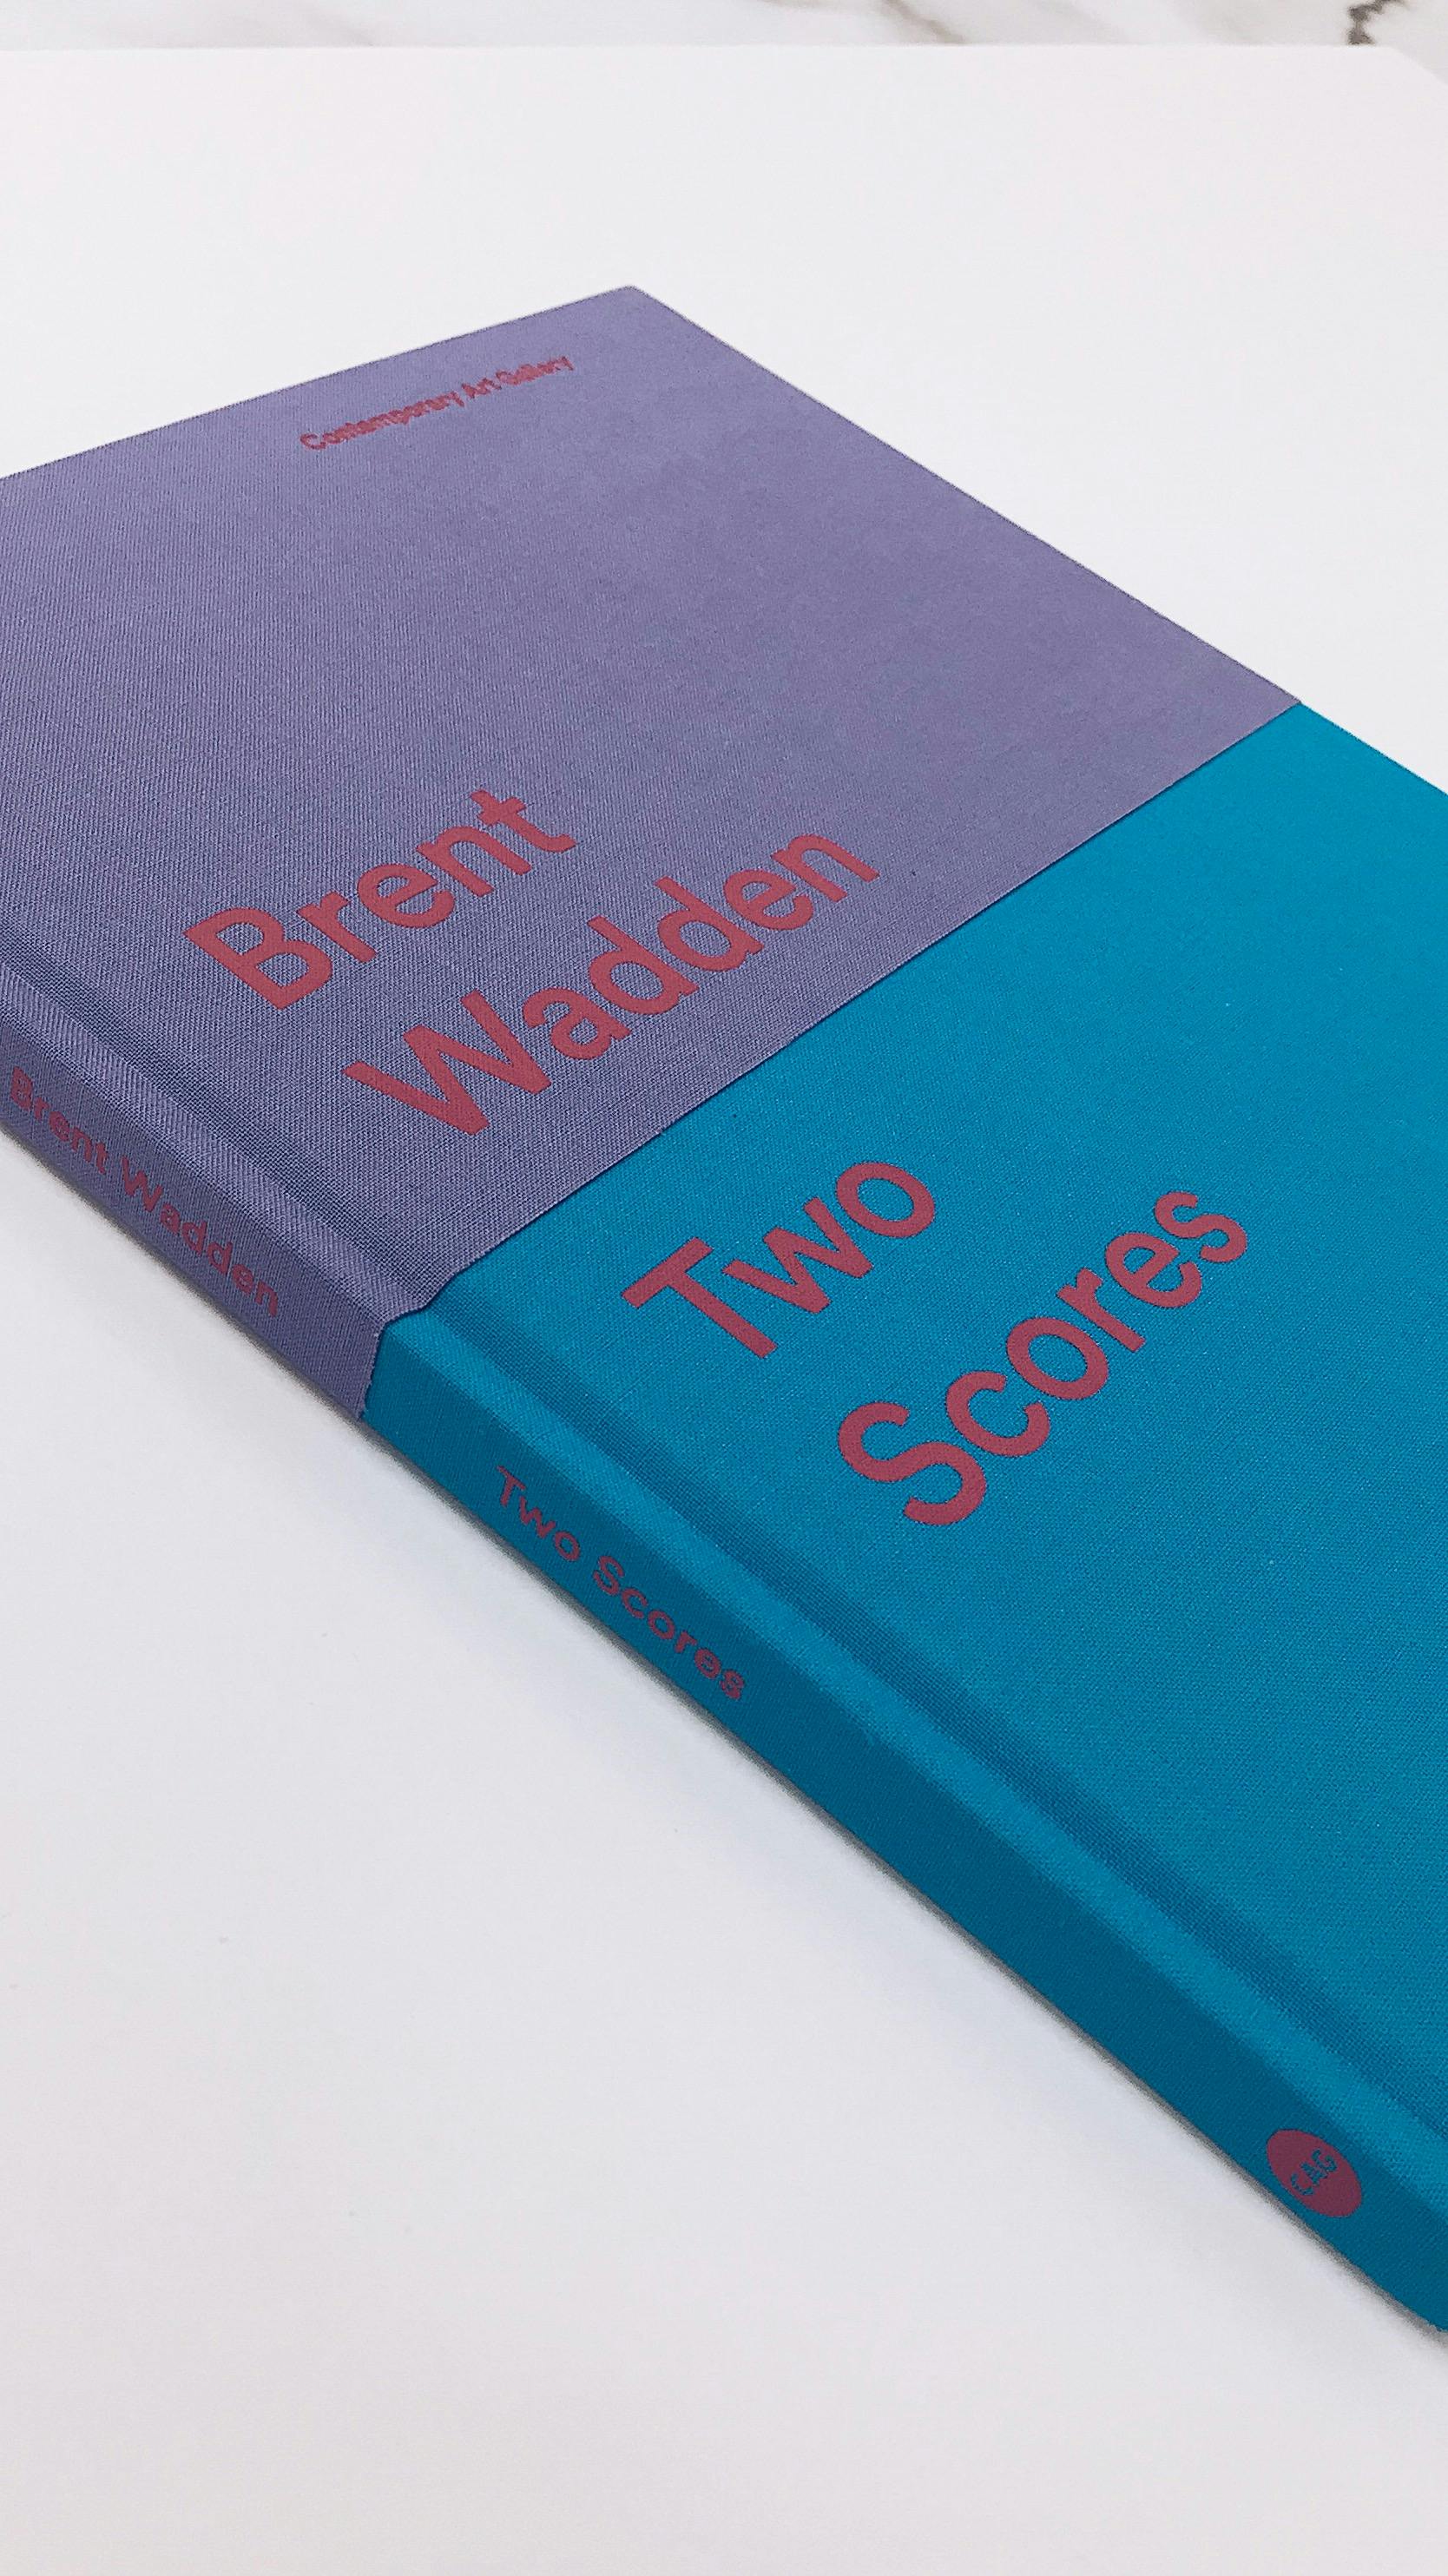 Brent Wadden's book, titled "two scores." The upper half of the book cover is purple and the bottom is blue. 